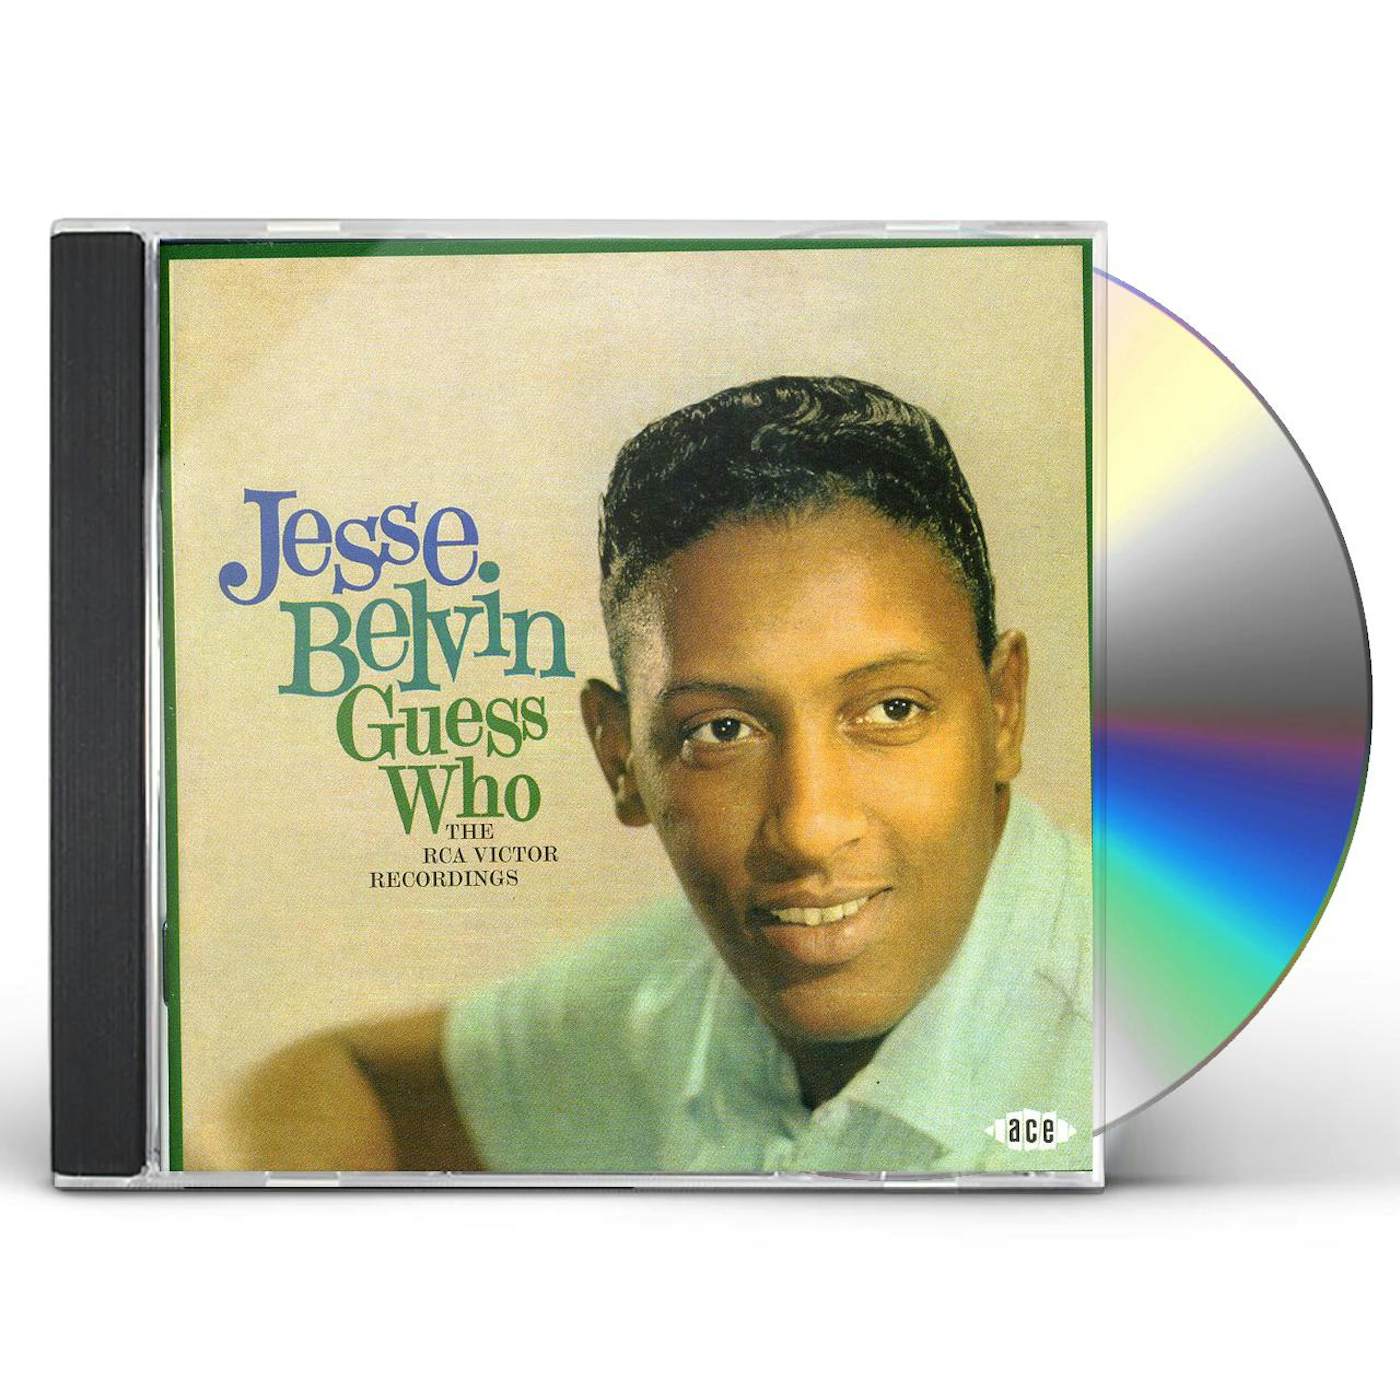 Jesse Belvin GUESS WHO CD